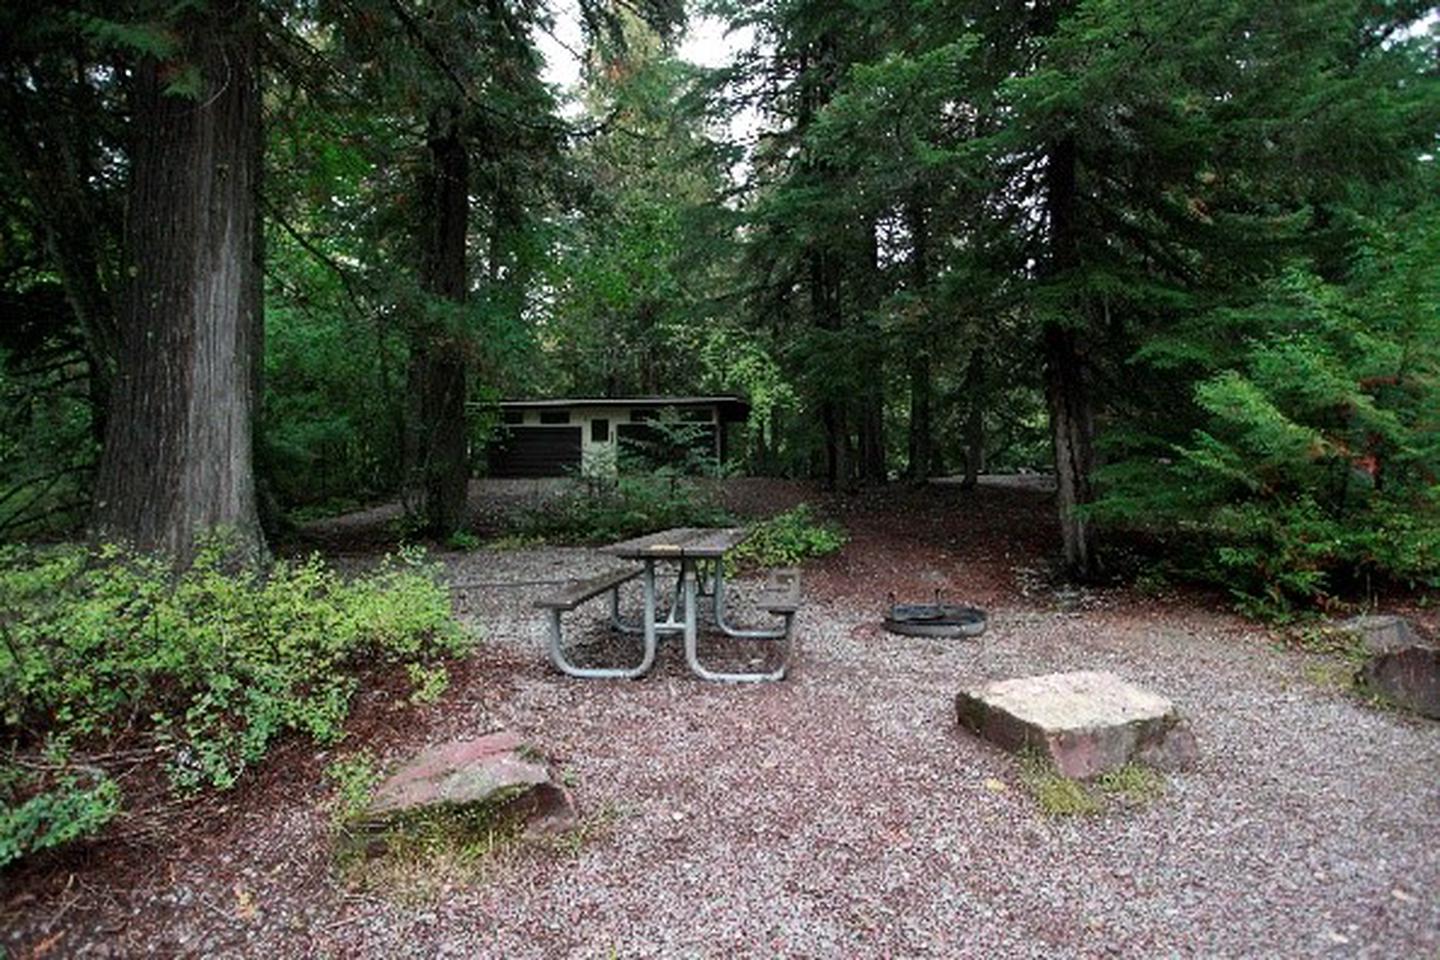 Gravel driveway covered with brown leaves in a wooded campsite with picnic table and fire ring.